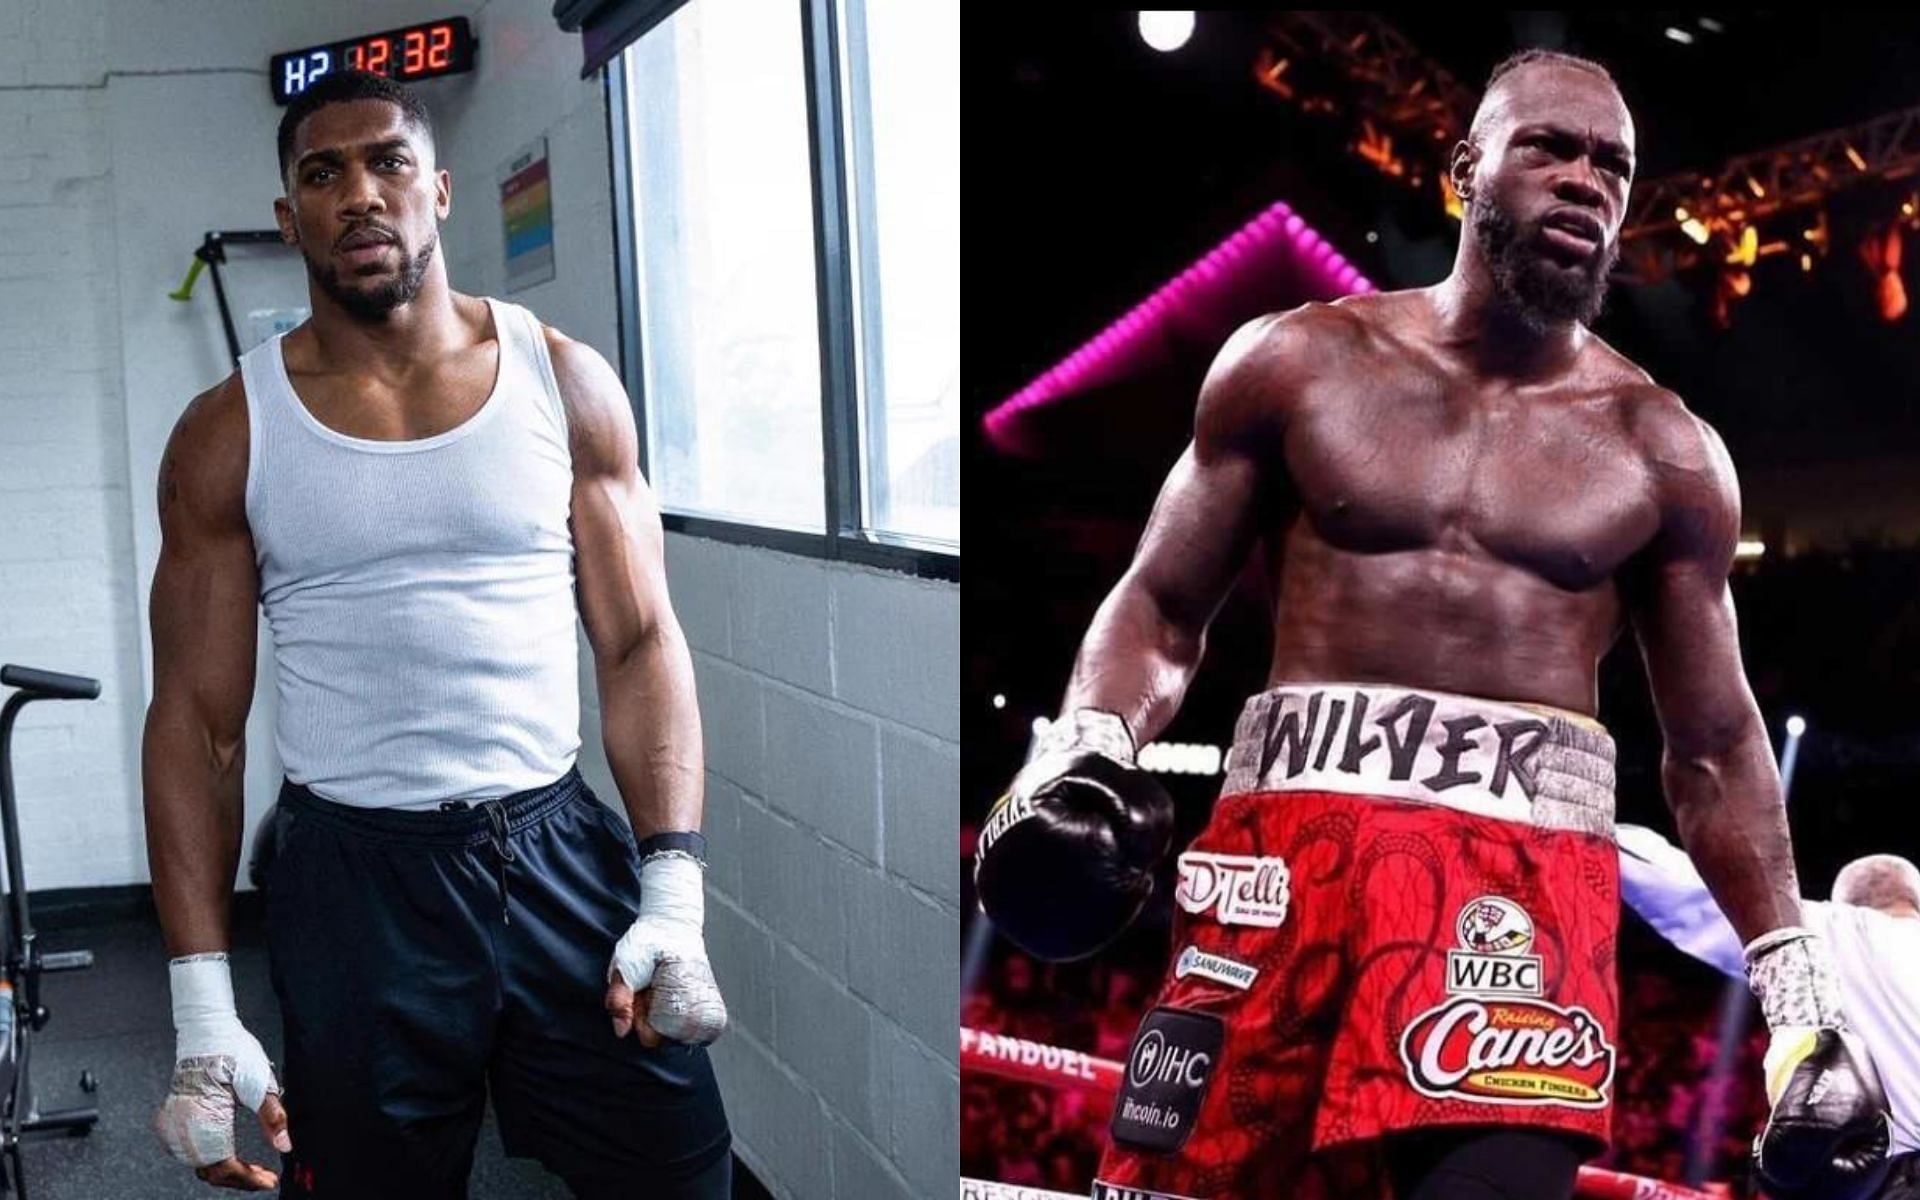 Anthony Joshua (left) and Deontay Wilder (right) (Image credits @anthonyjoshua on Twitter and @bronzebomber on Instagram)